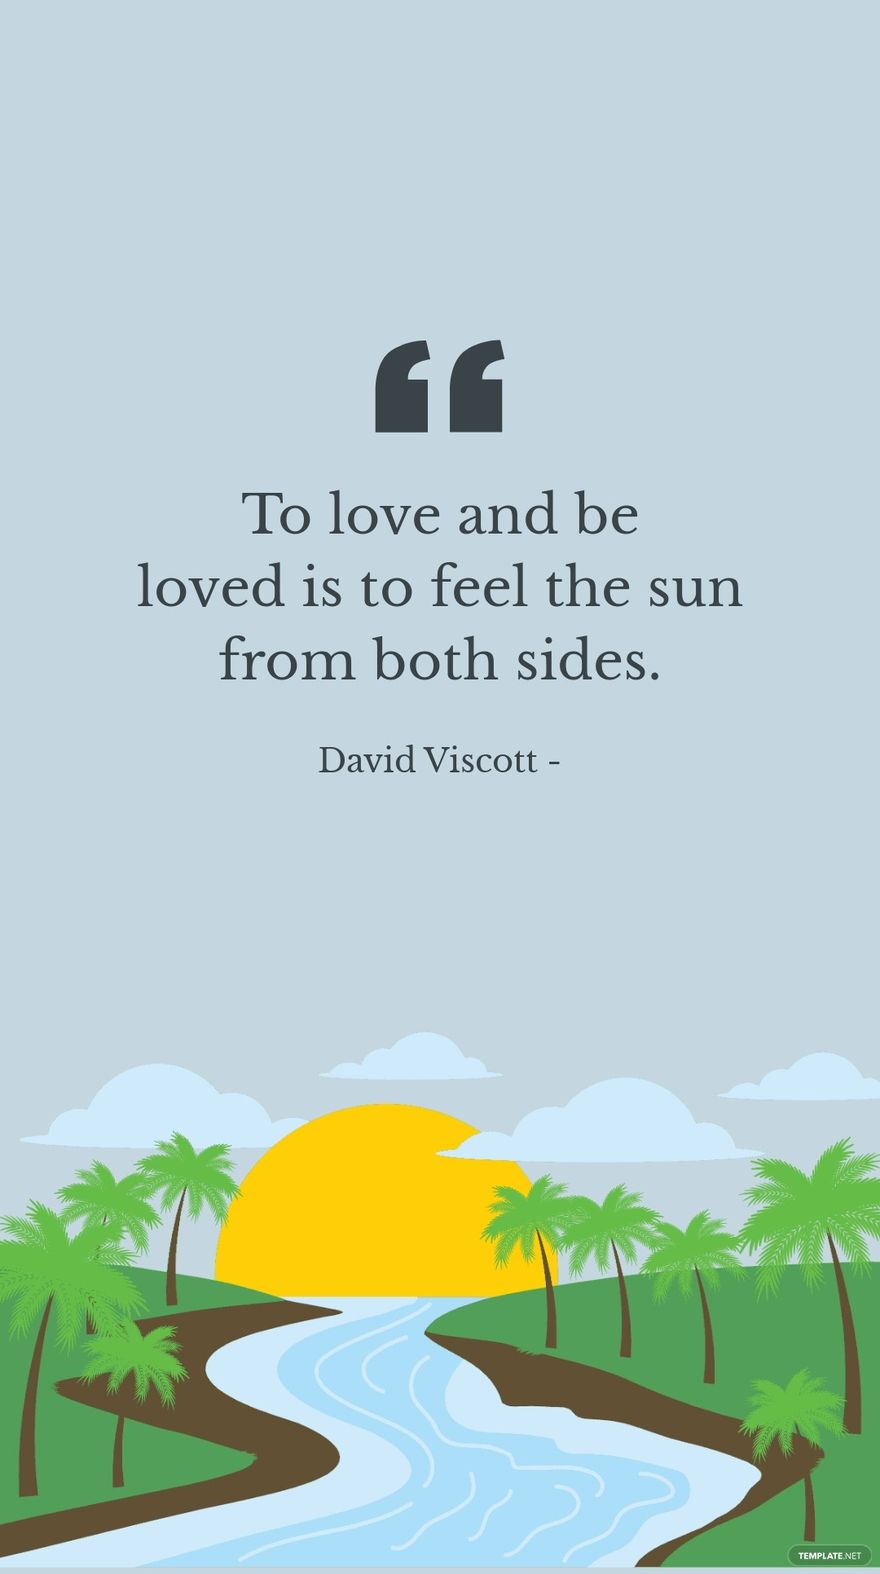 David Viscott - To love and be loved is to feel the sun from both sides.